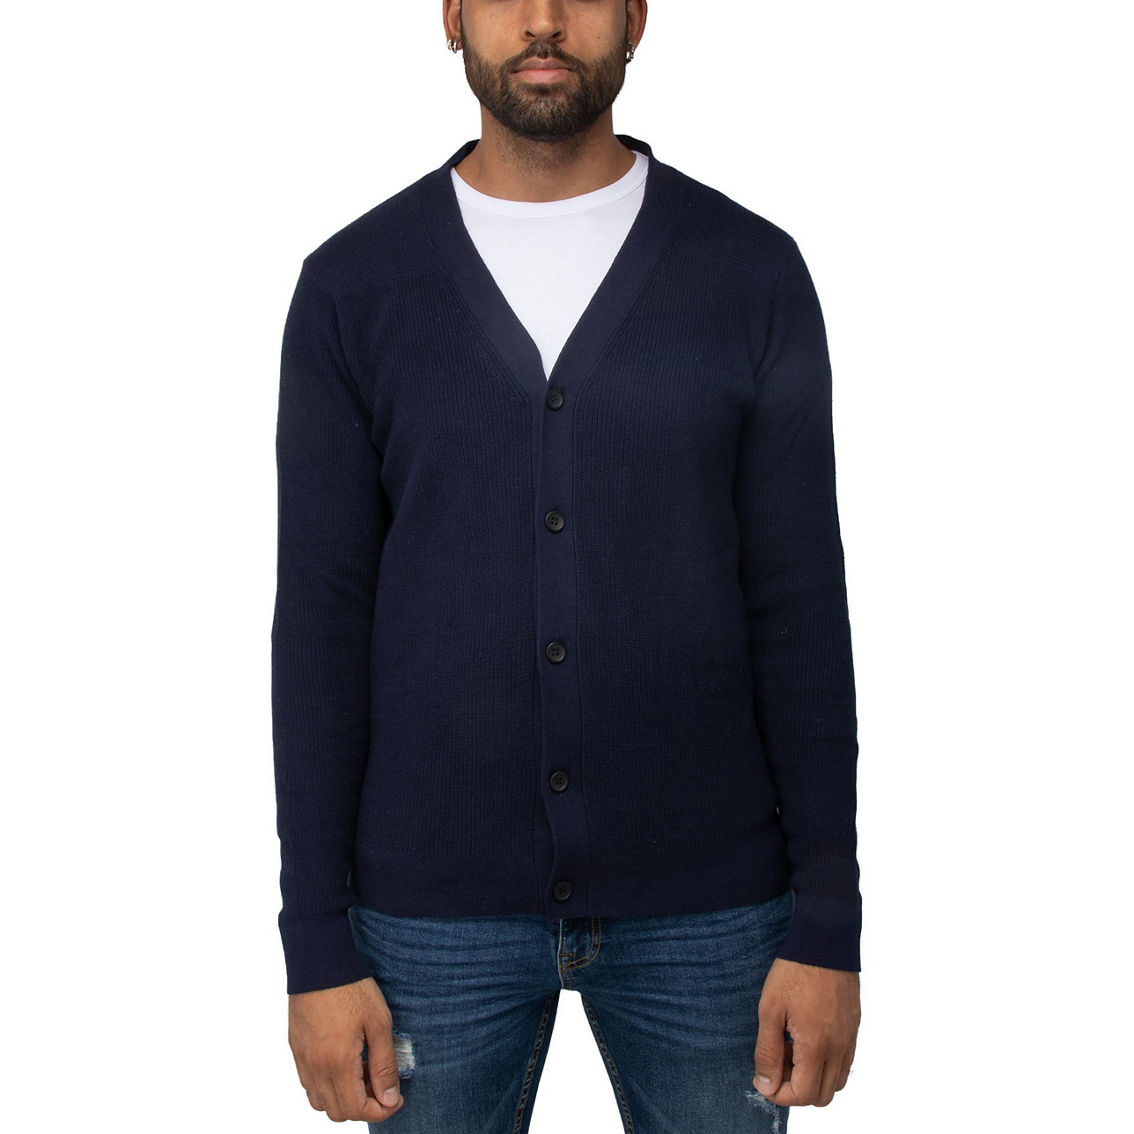 Men's Cotton Cardigan Sweater | Sweaters | Clothing & Accessories ...